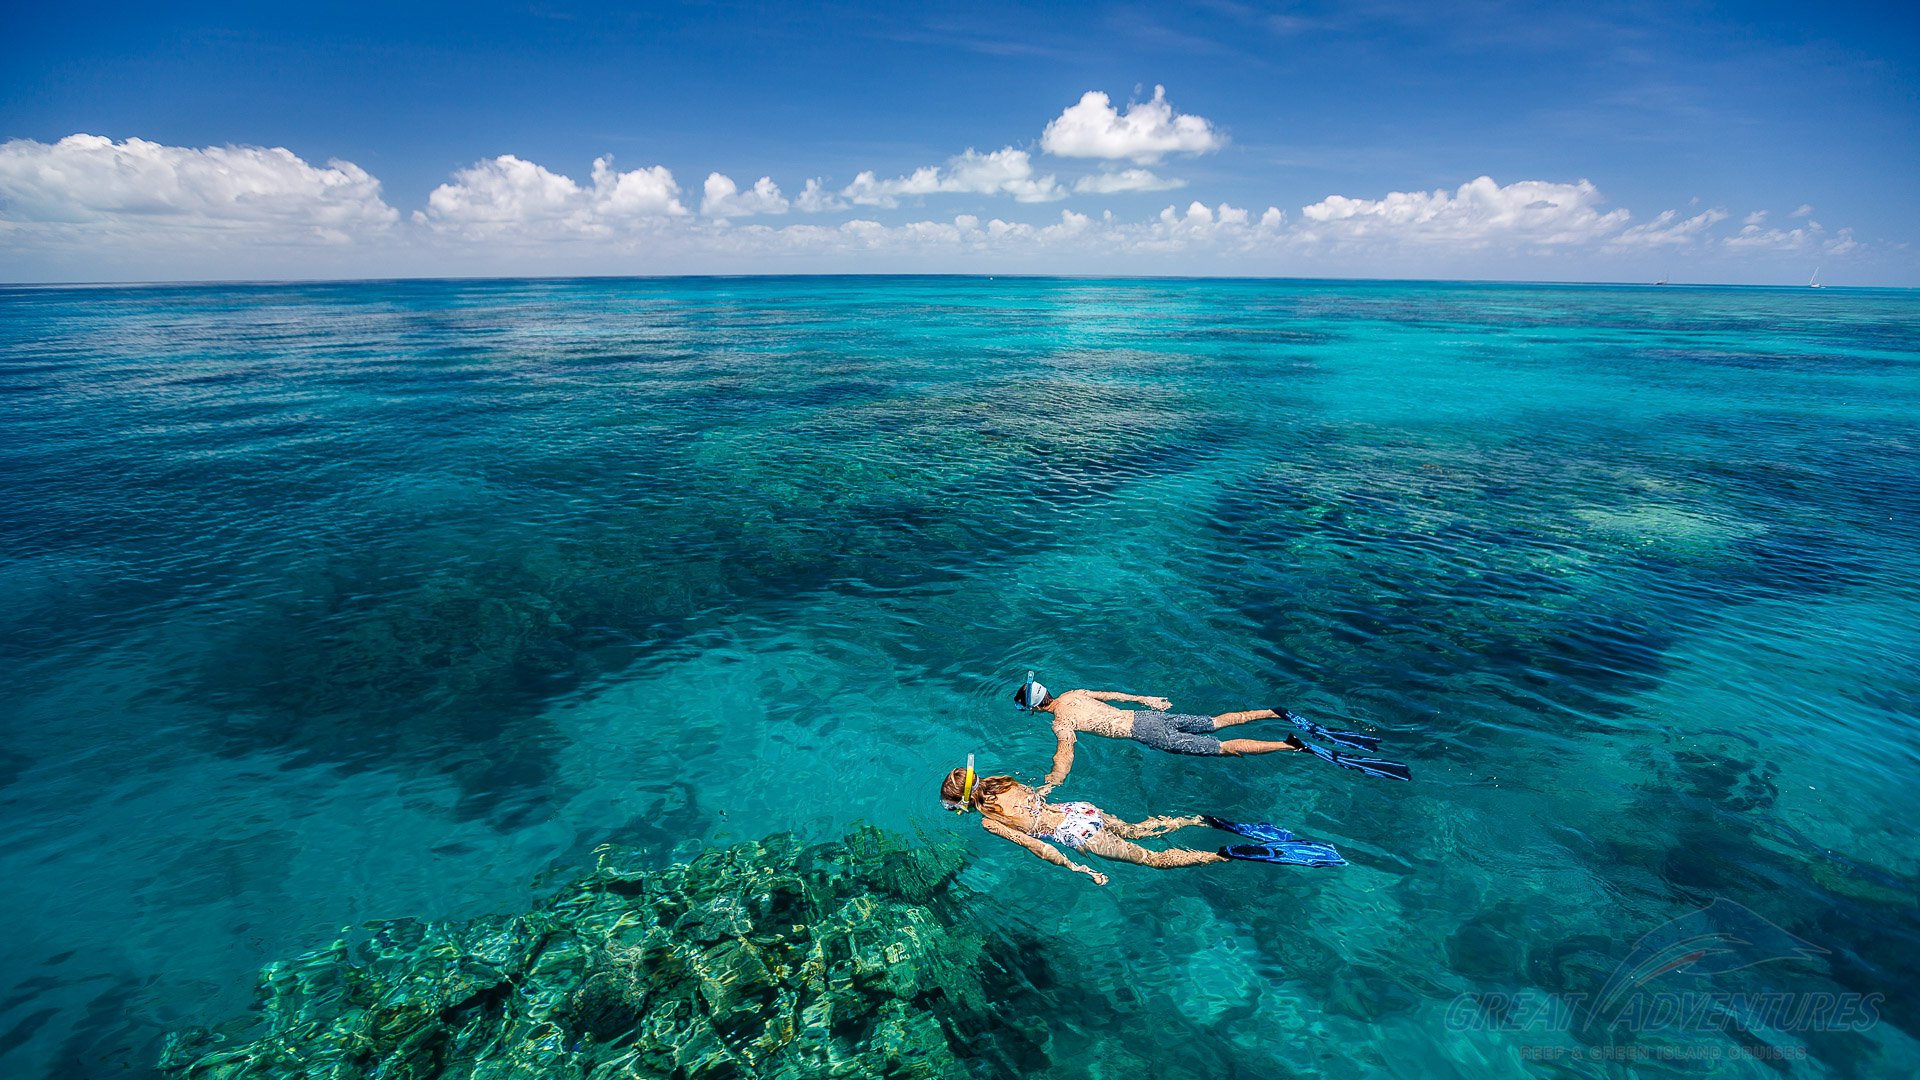 https://www.discoveryourway.com.au/wp-content/uploads/2018/10/great-adventures-outer-barrier-reef-124145-1920-1.jpg